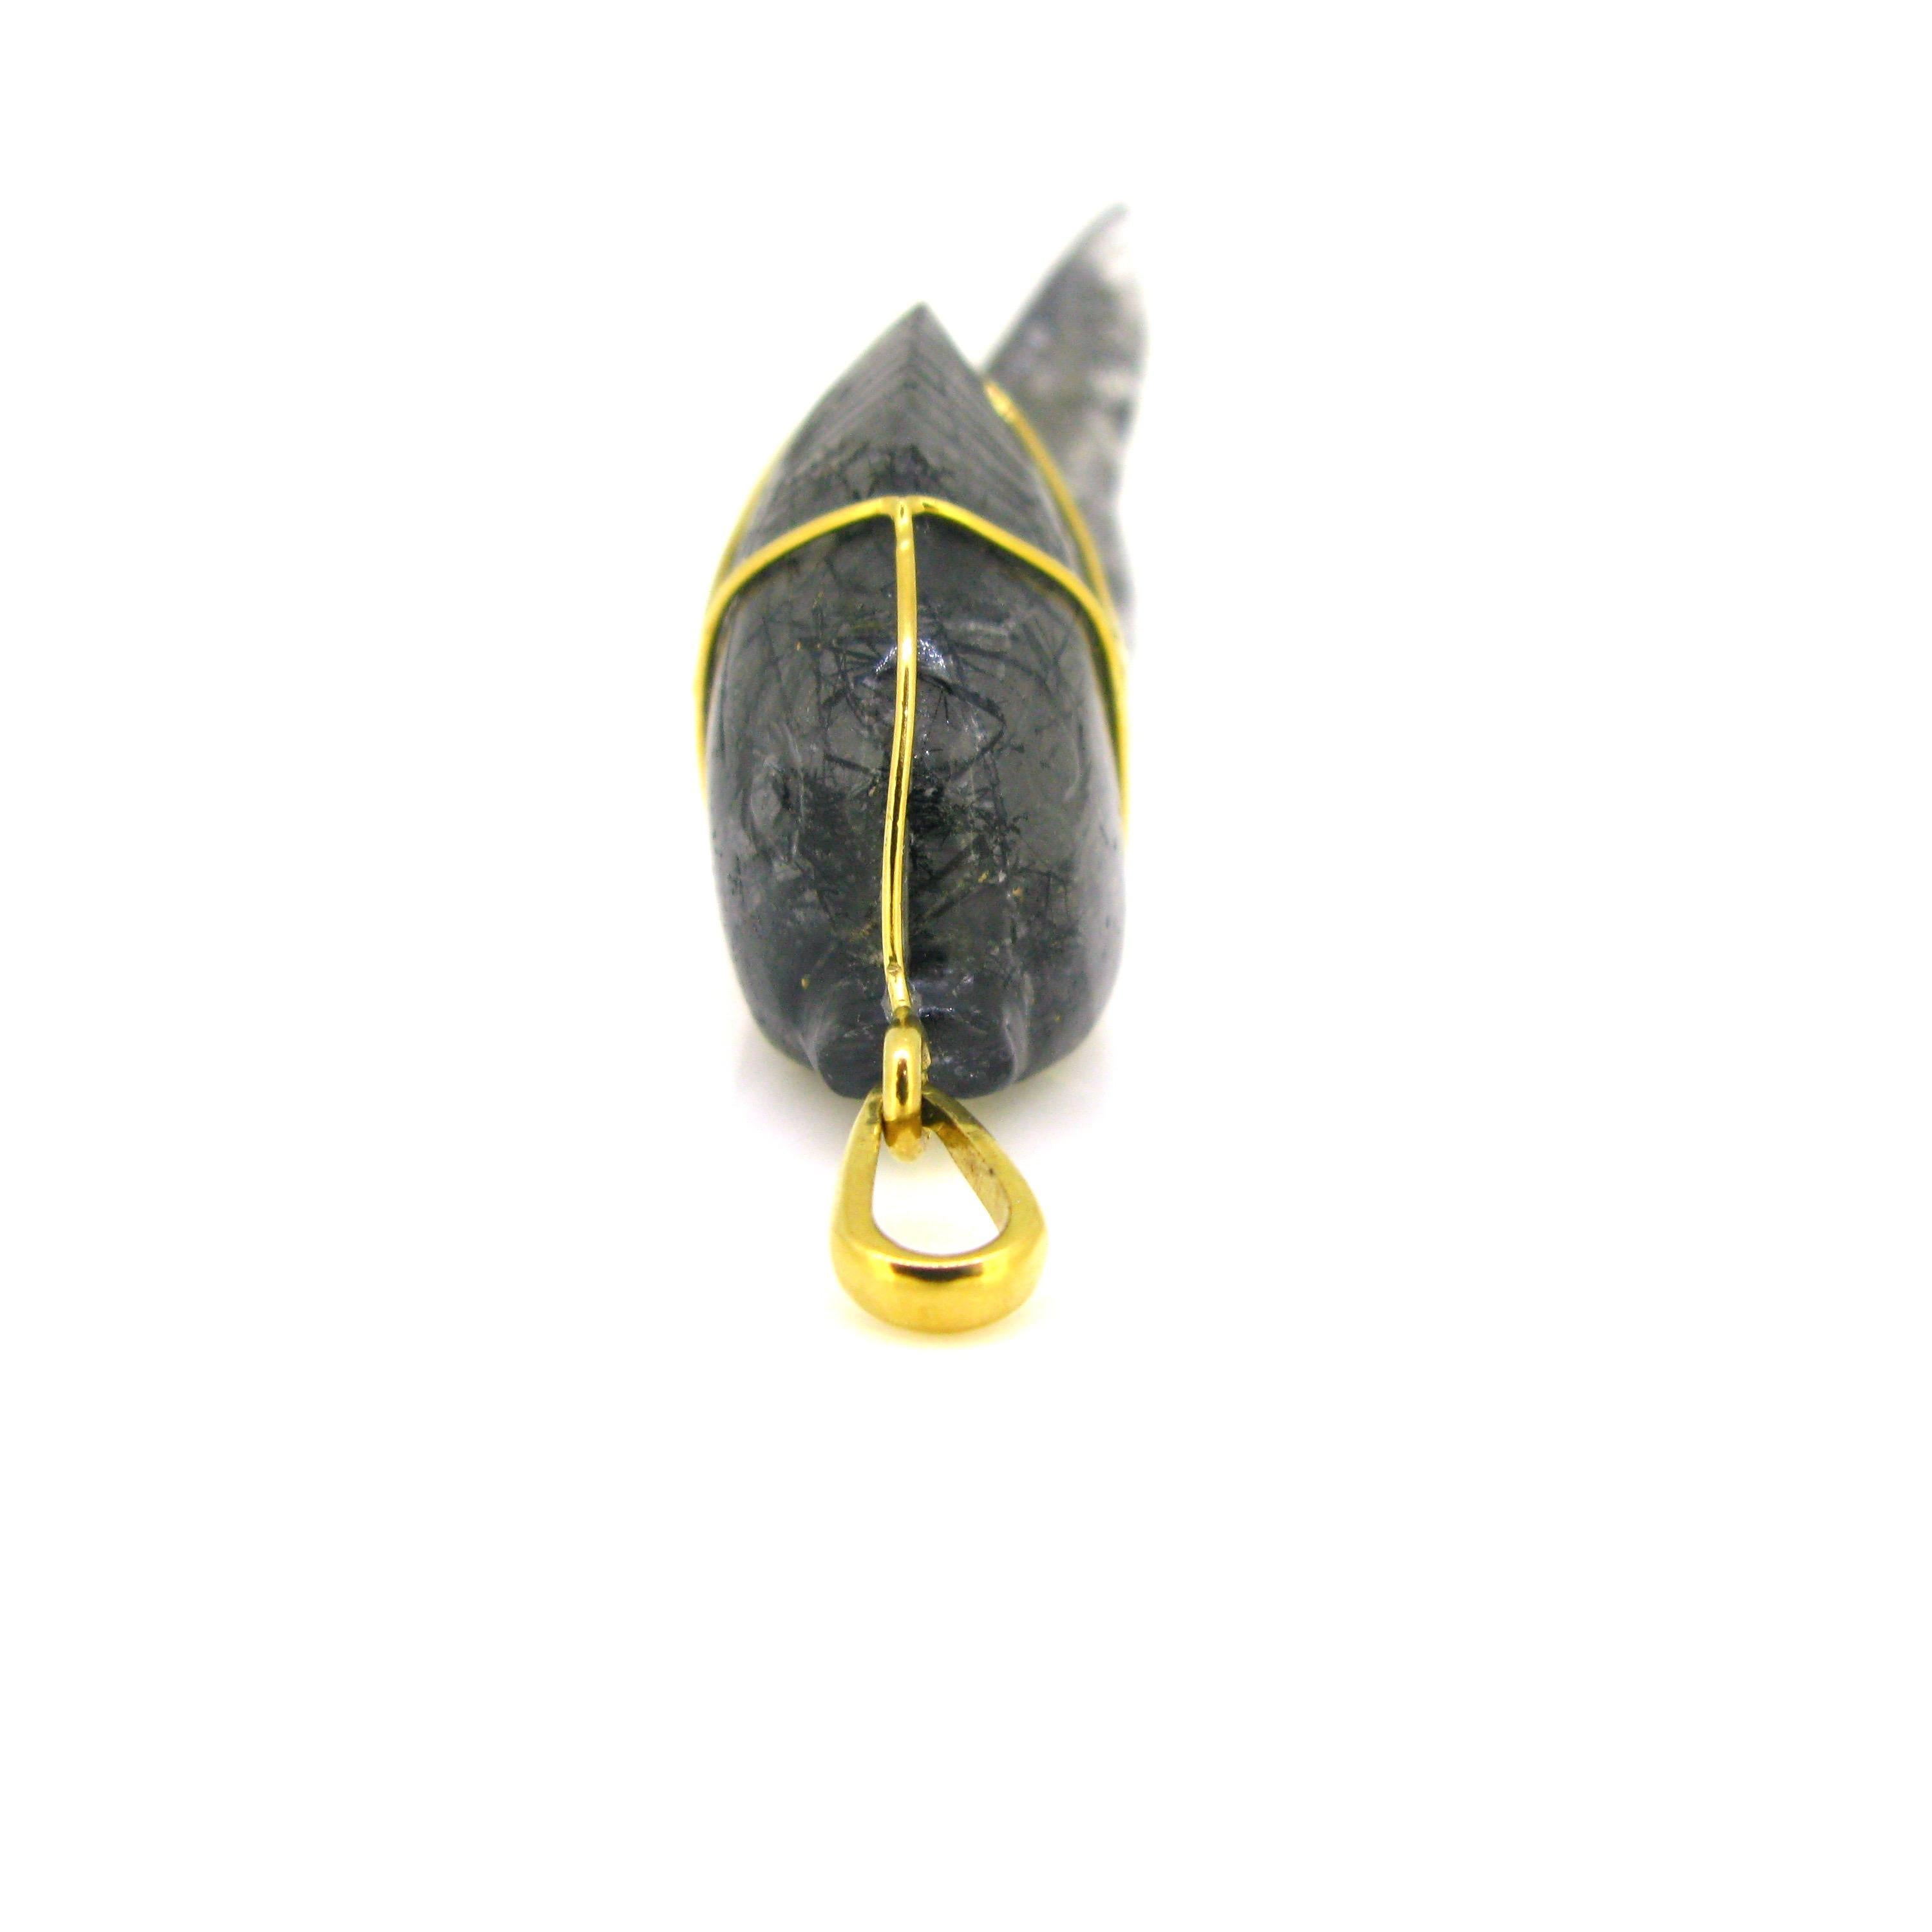 This beautiful and unusual crystal combines two gemstones: Quartz Crystal and Black Tourmaline. It was nicely engraved into a fish. It is hold by a 18kt yellow gold wire. The bale is signed Jean Été, a famous French design during the Seventies. It